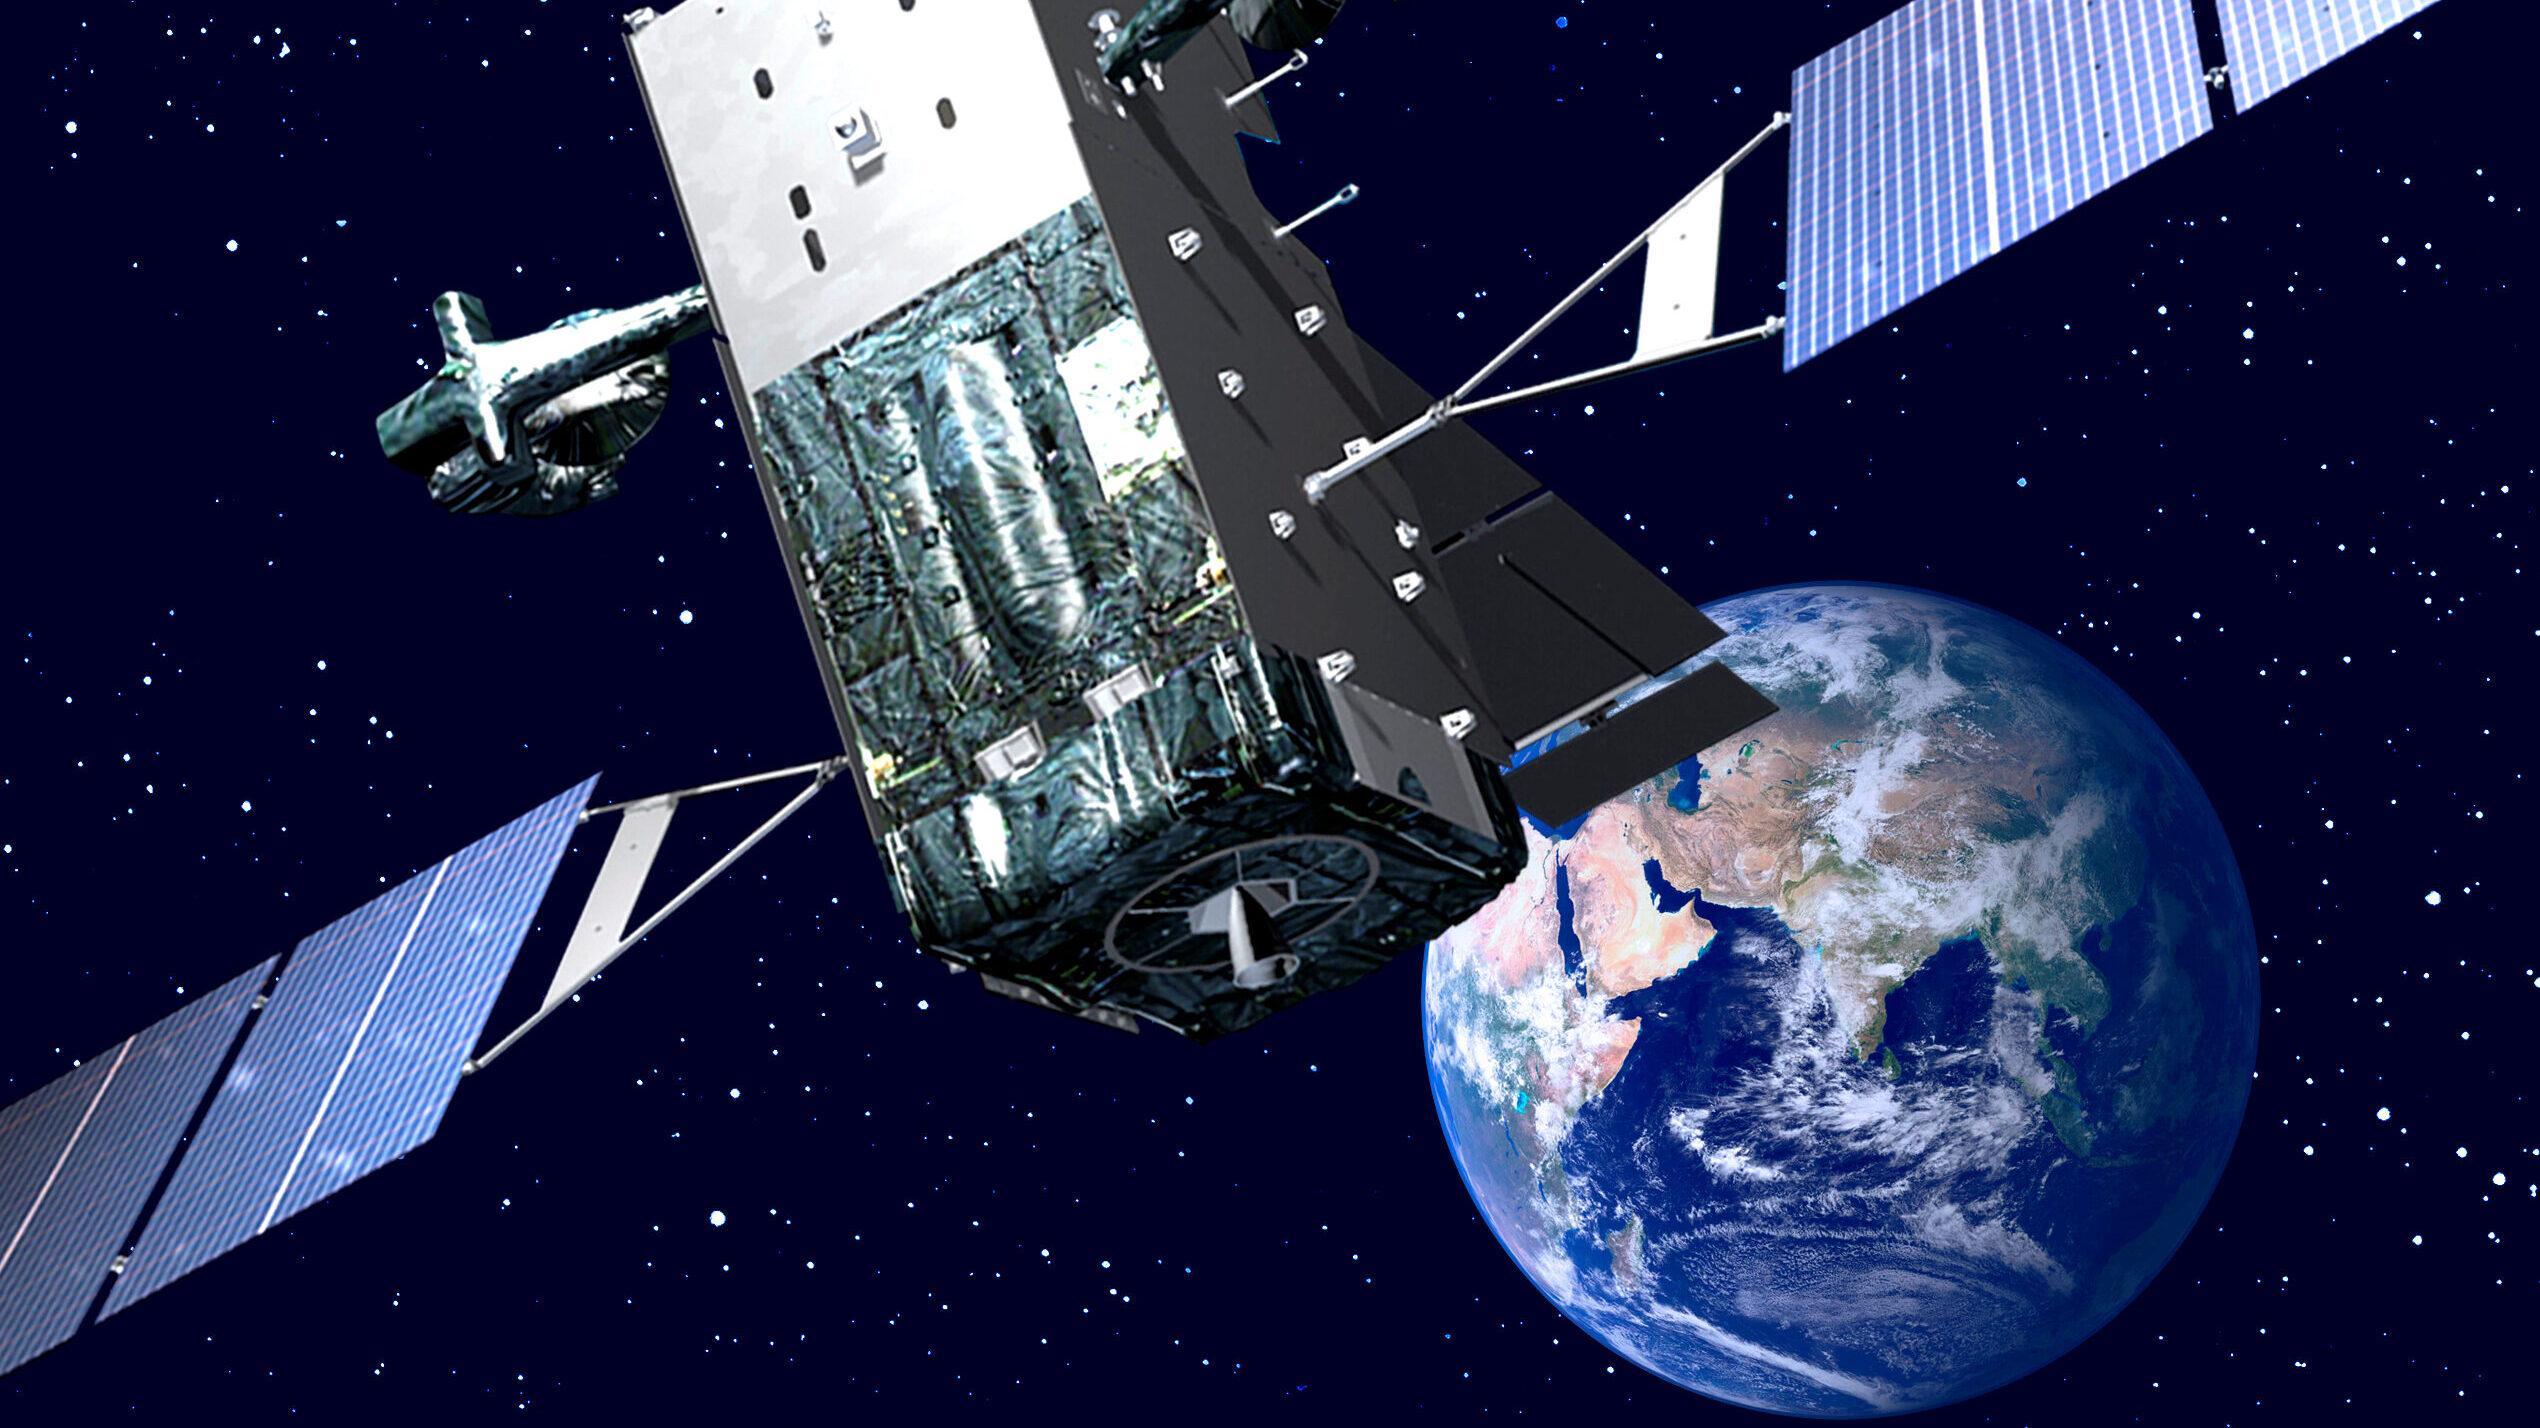 Space missile warning system to include MEO backup in case of attack: Tournear